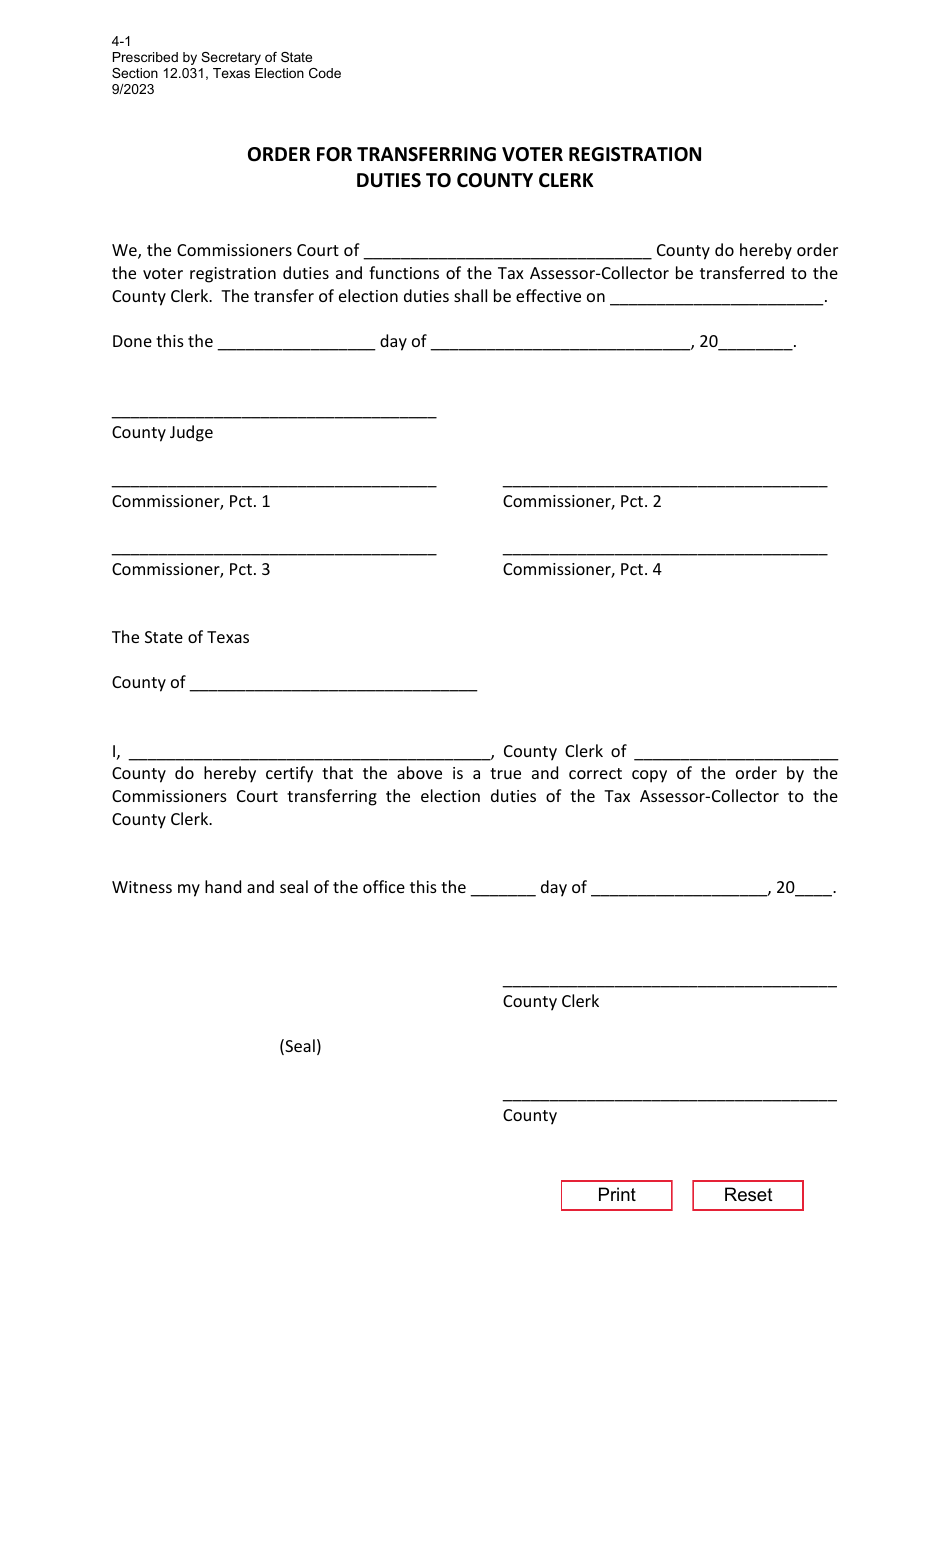 Form 4-1 Order for Transferring Voter Registration Duties to County Clerk - Texas, Page 1